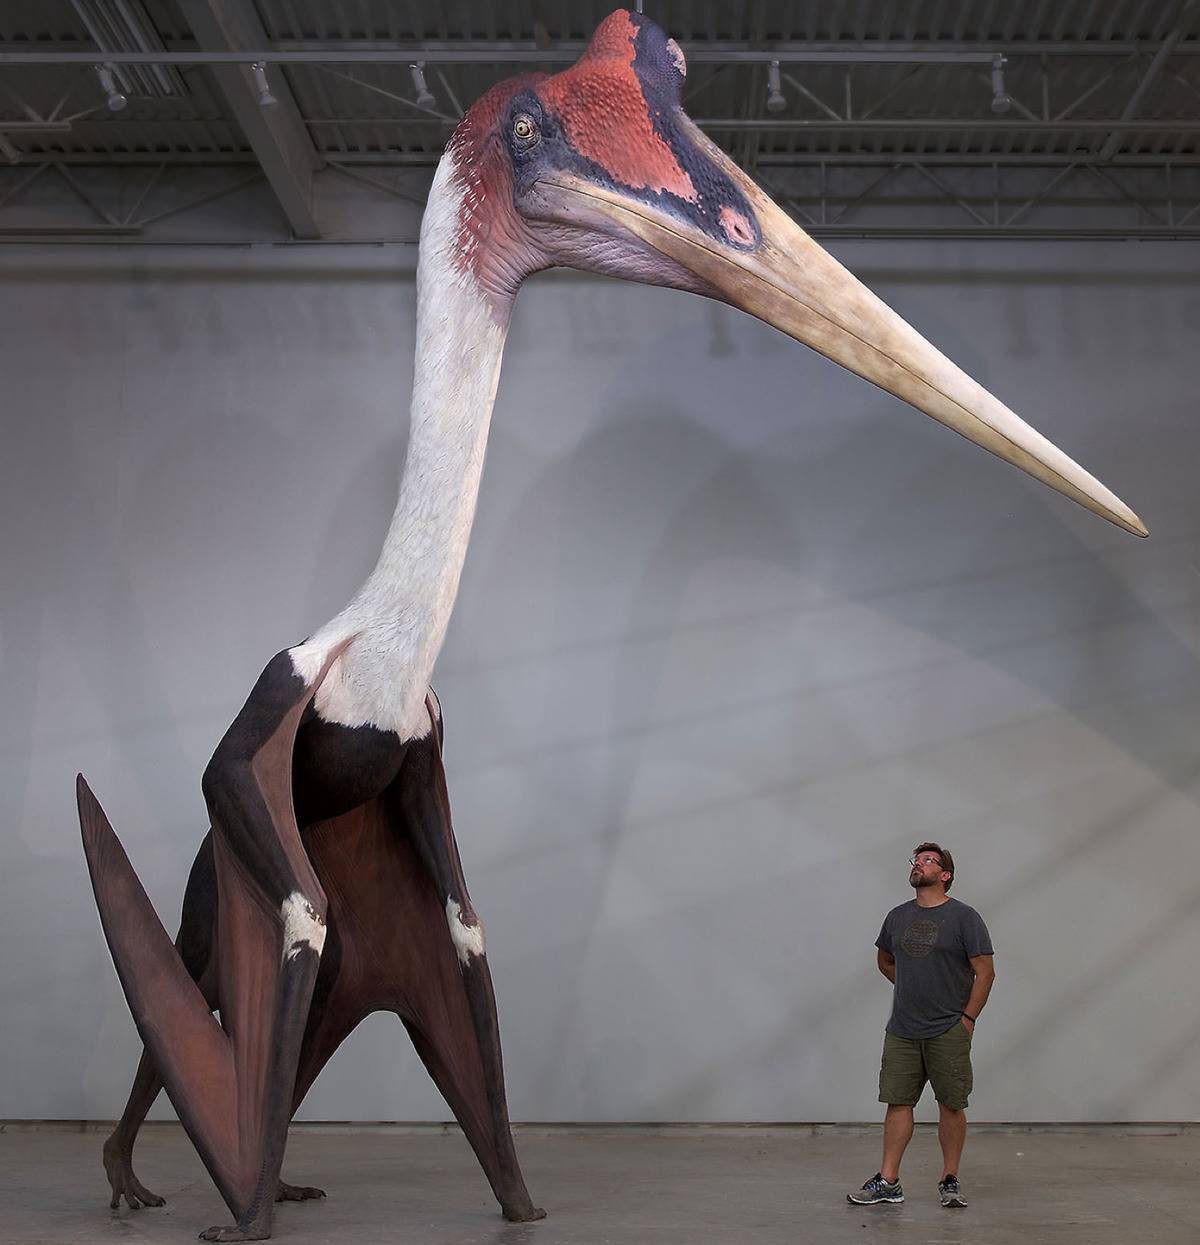 <p>Here's a dude standing next to a replica of a Quetzalcoatlus, which was one of the largest known flying animals of all time.</p> <p>Their wings apparently stretch to 33 feet when opened up, but I'm out here wondering how it is able to fly with that big beak on its face. </p>